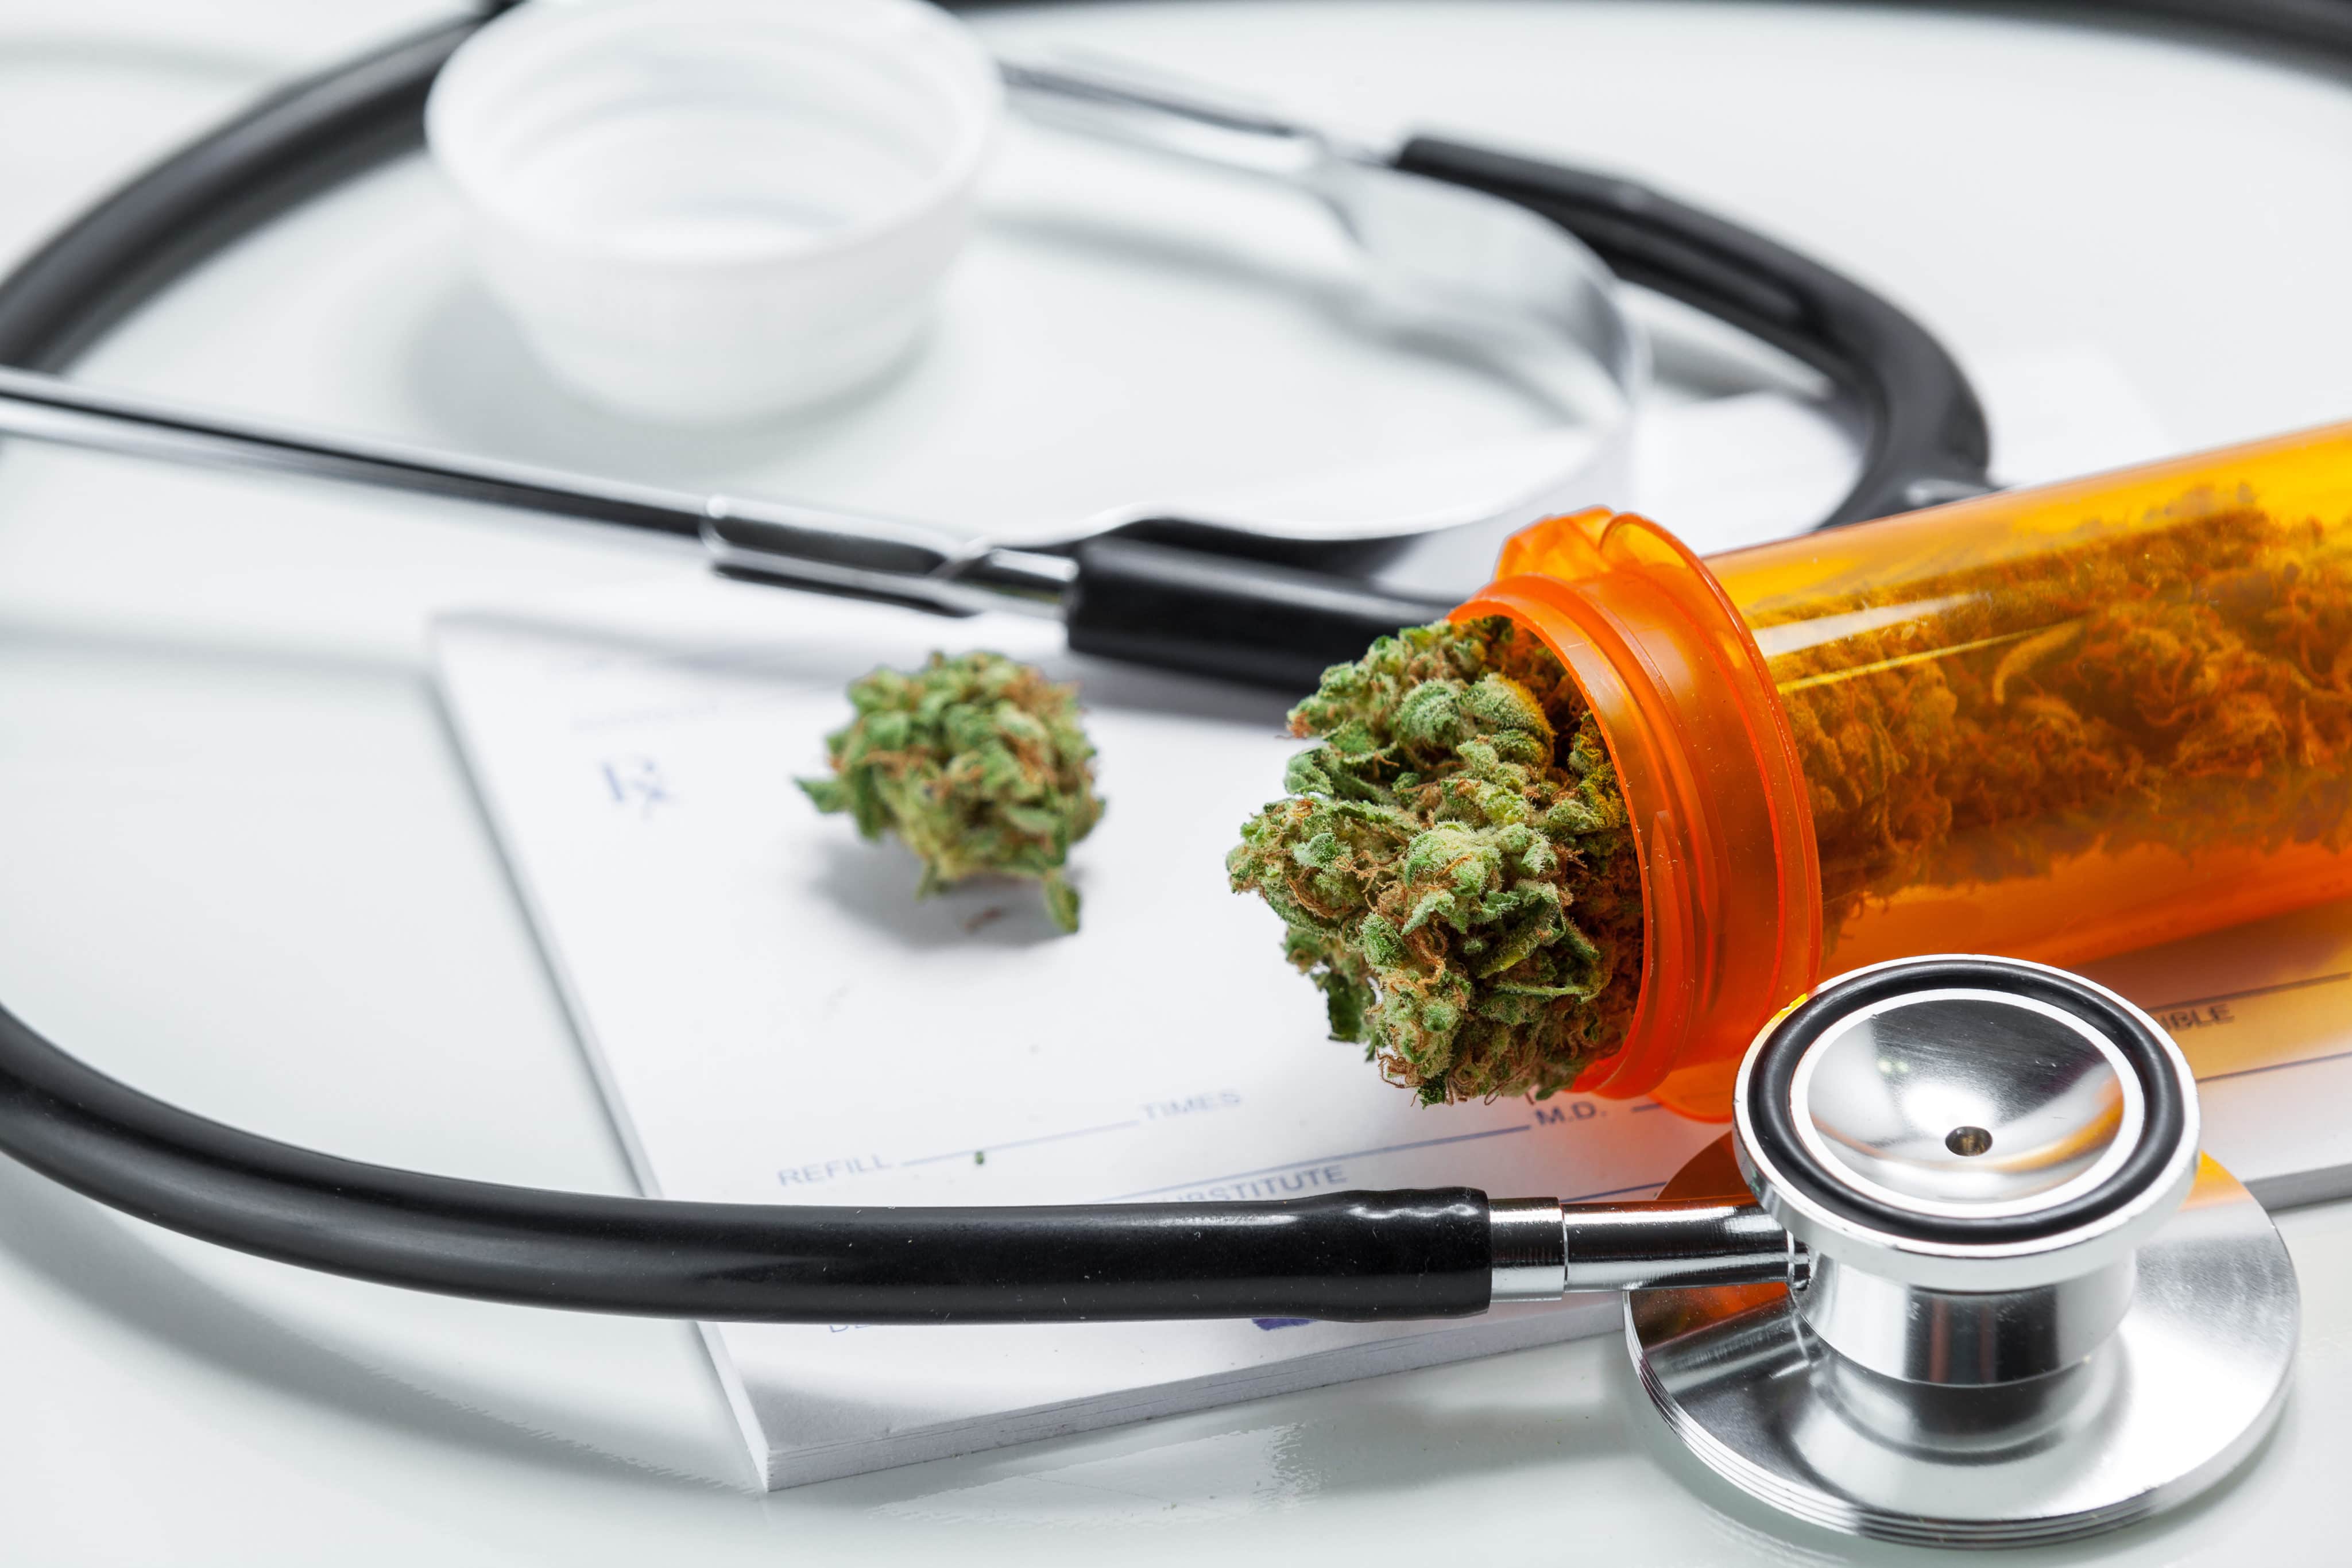 New Washington, D.C. Policy Lets Adults ‘Self-Certify’ for Medical Cannabis